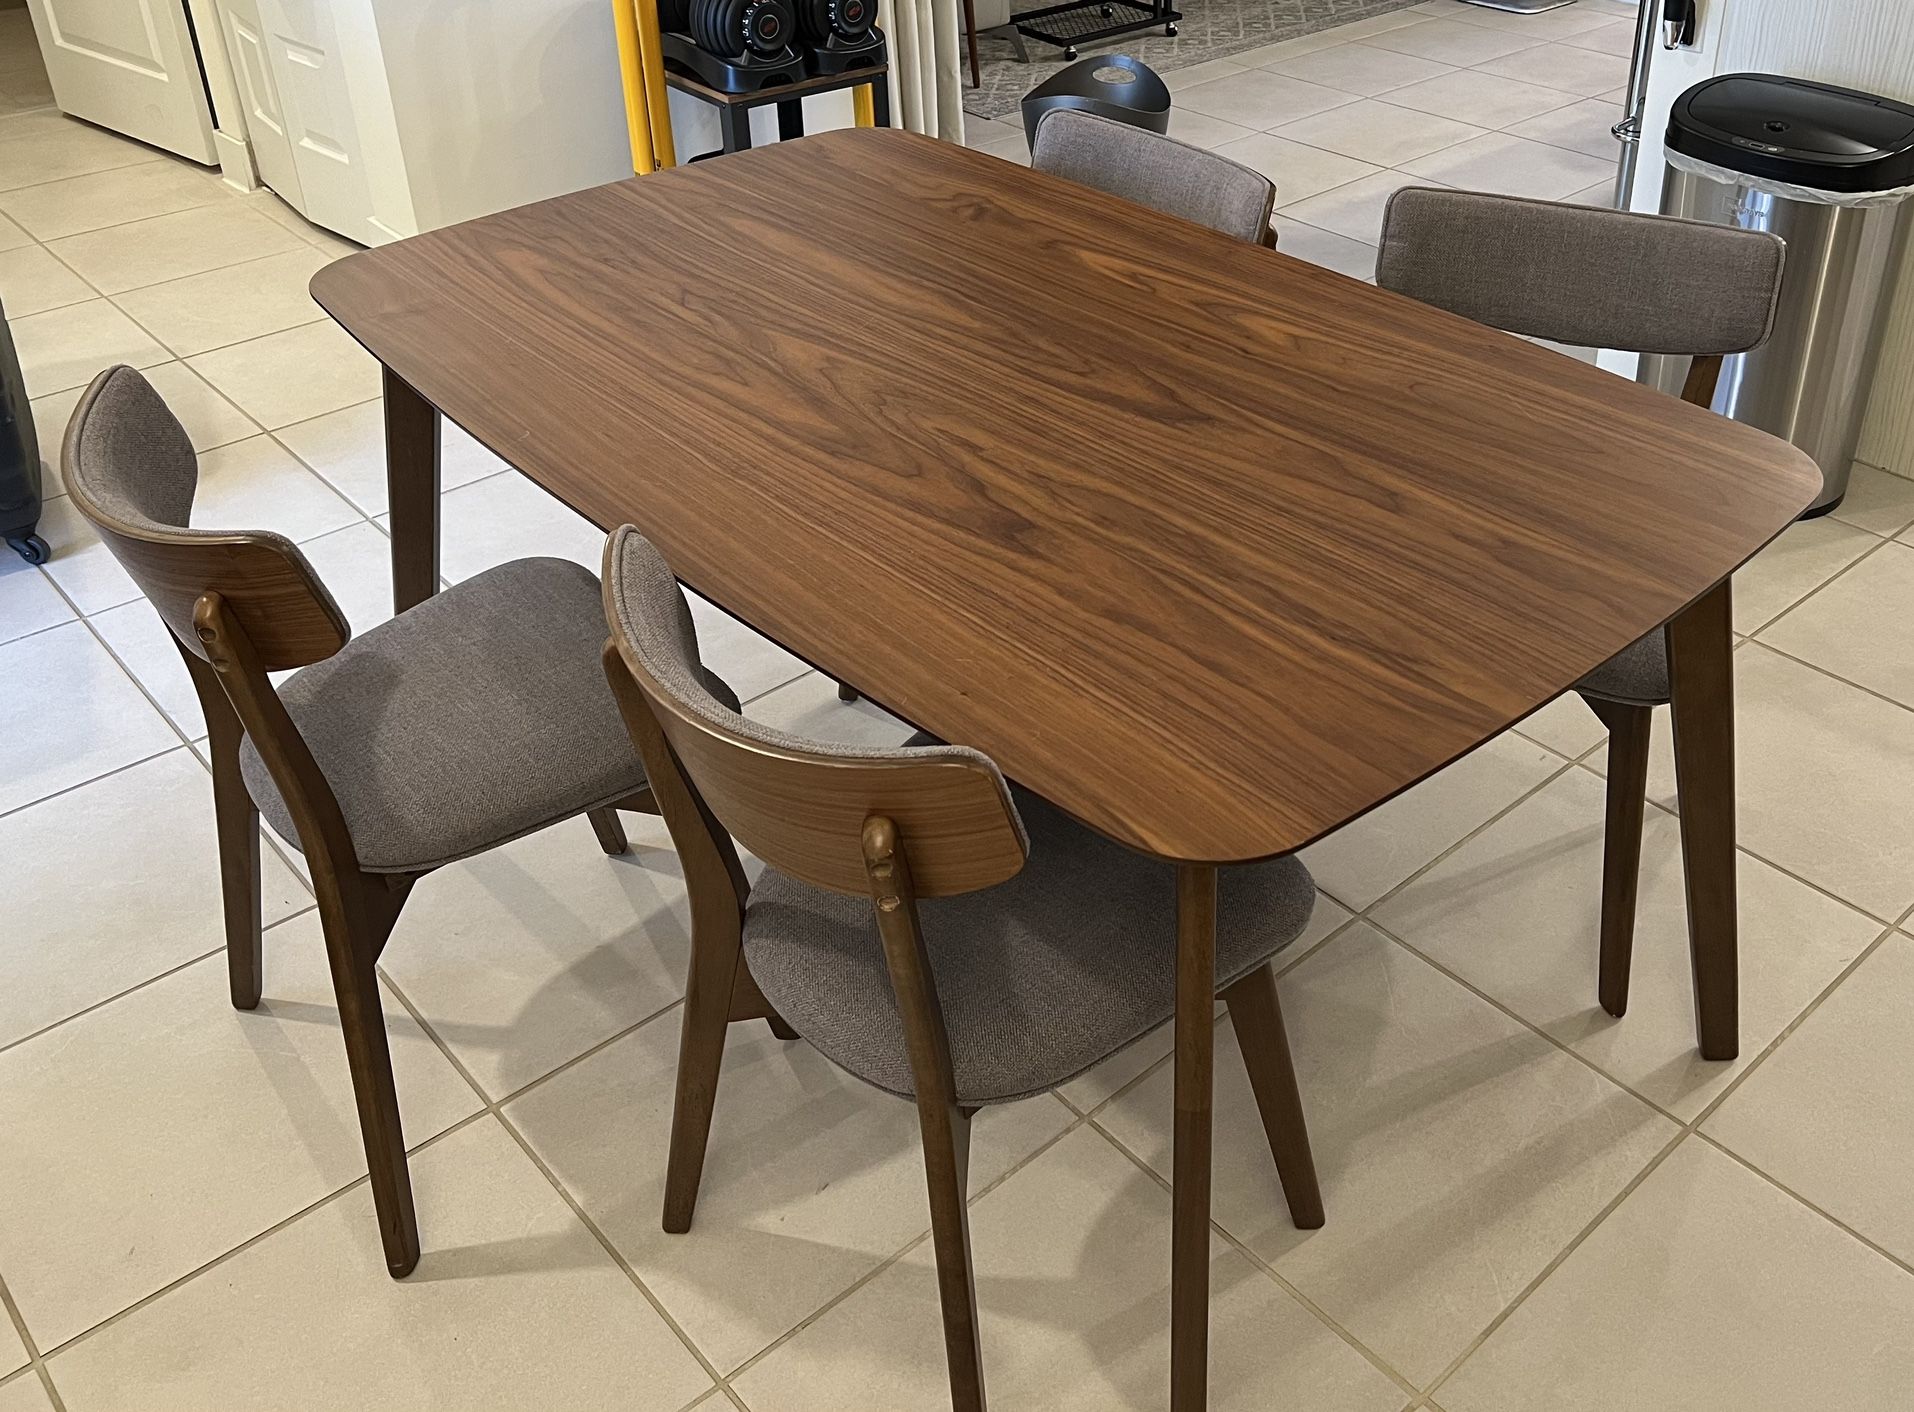 Walnut Solid Wood Dining Table + 4 Chairs